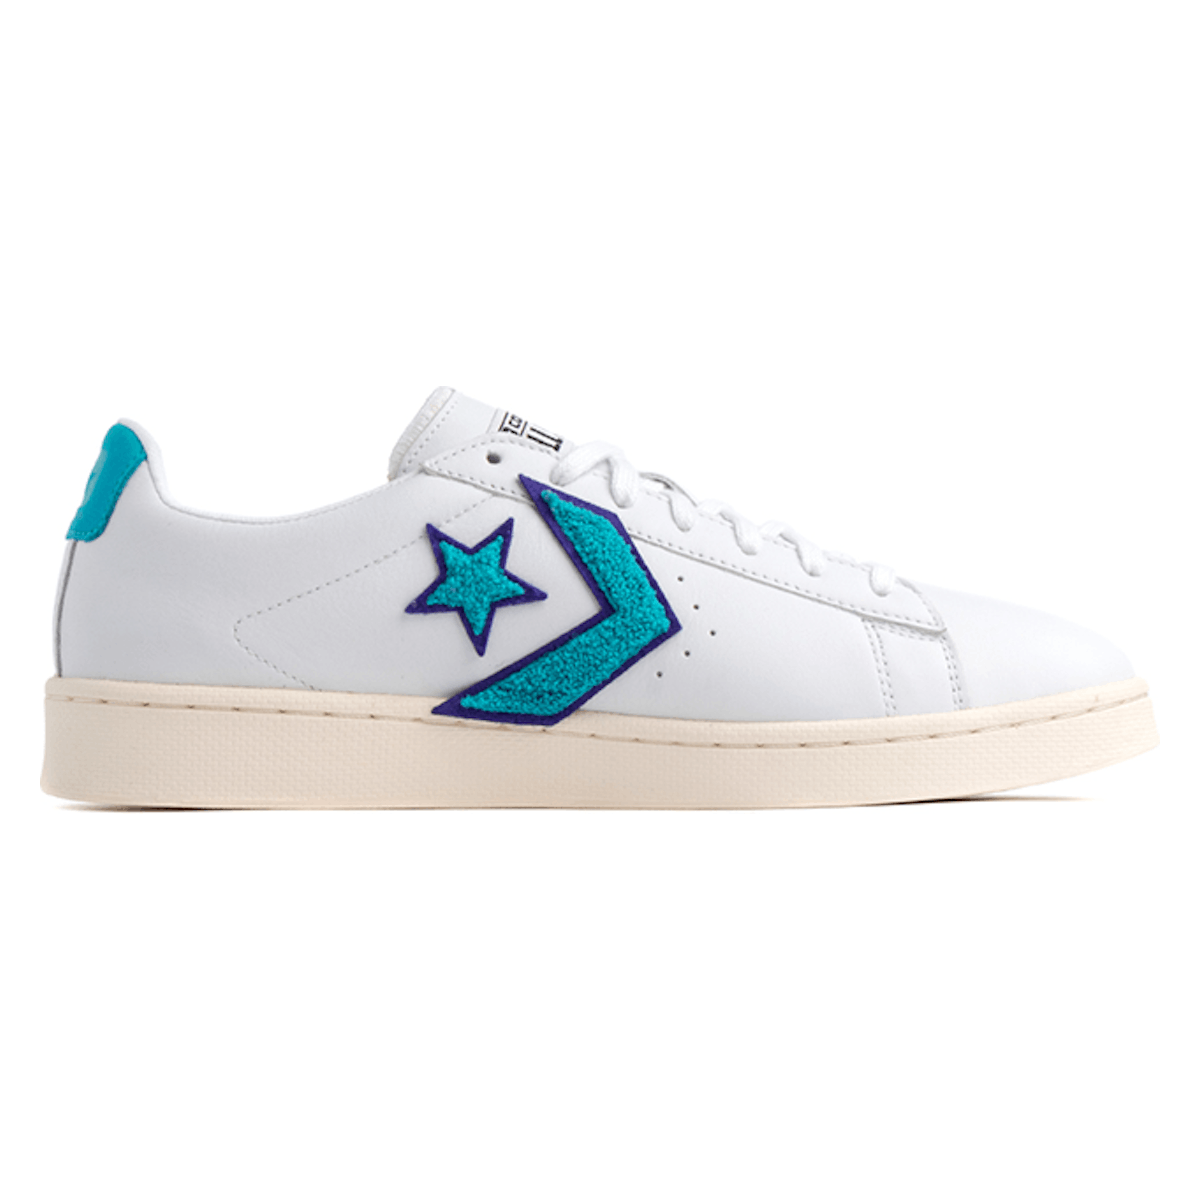 Converse Pro Leather OX 1980 Pack "Deep Wisteria"